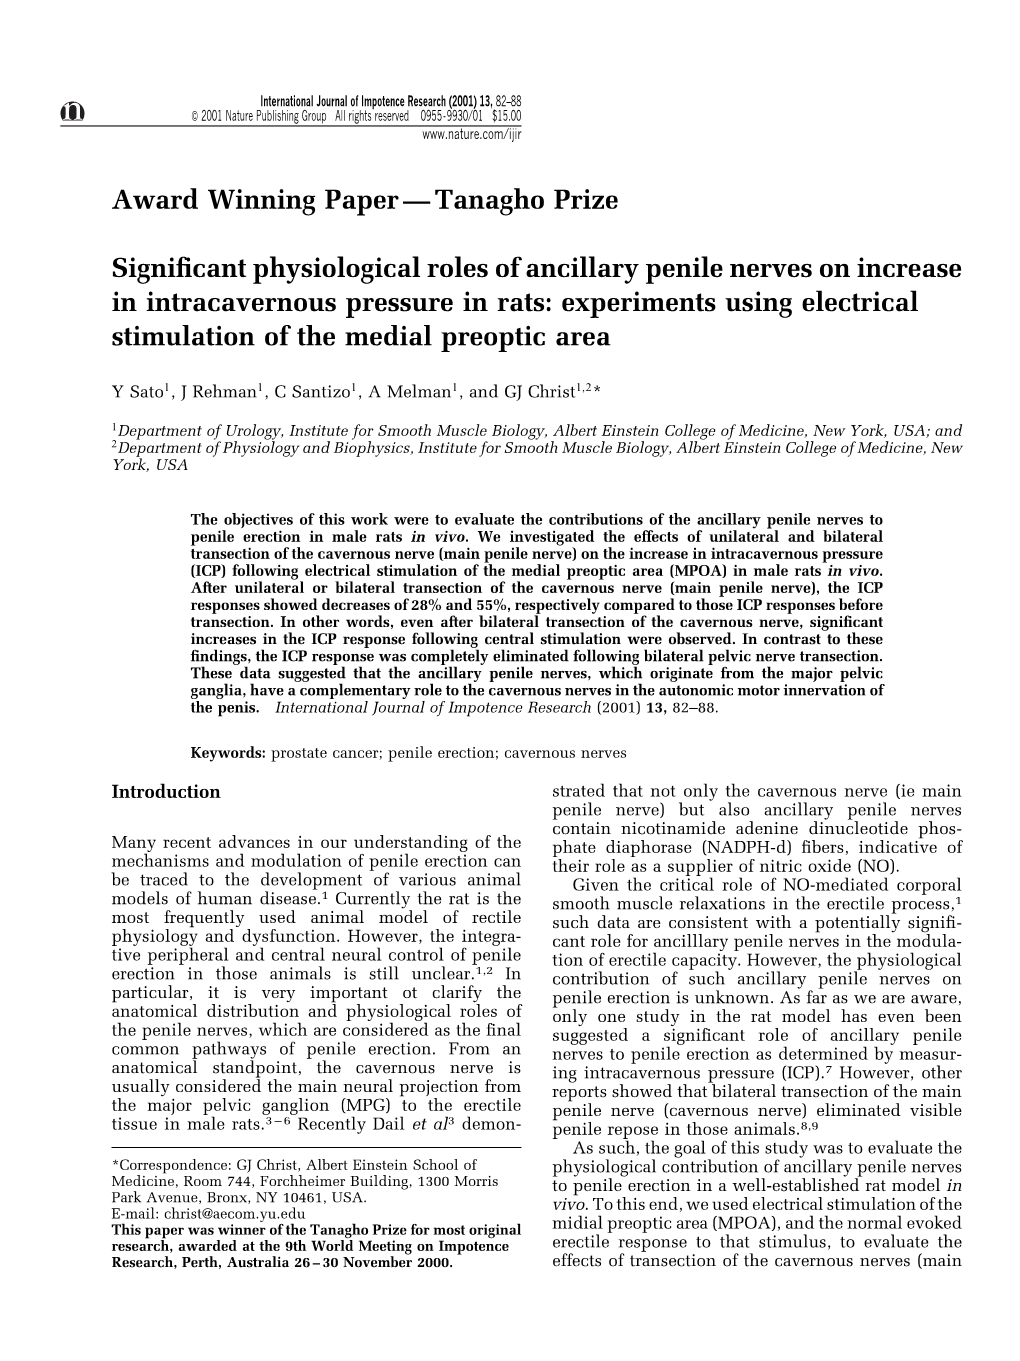 Award Winning Paper Ð Tanagho Prize Signi®Cant Physiological